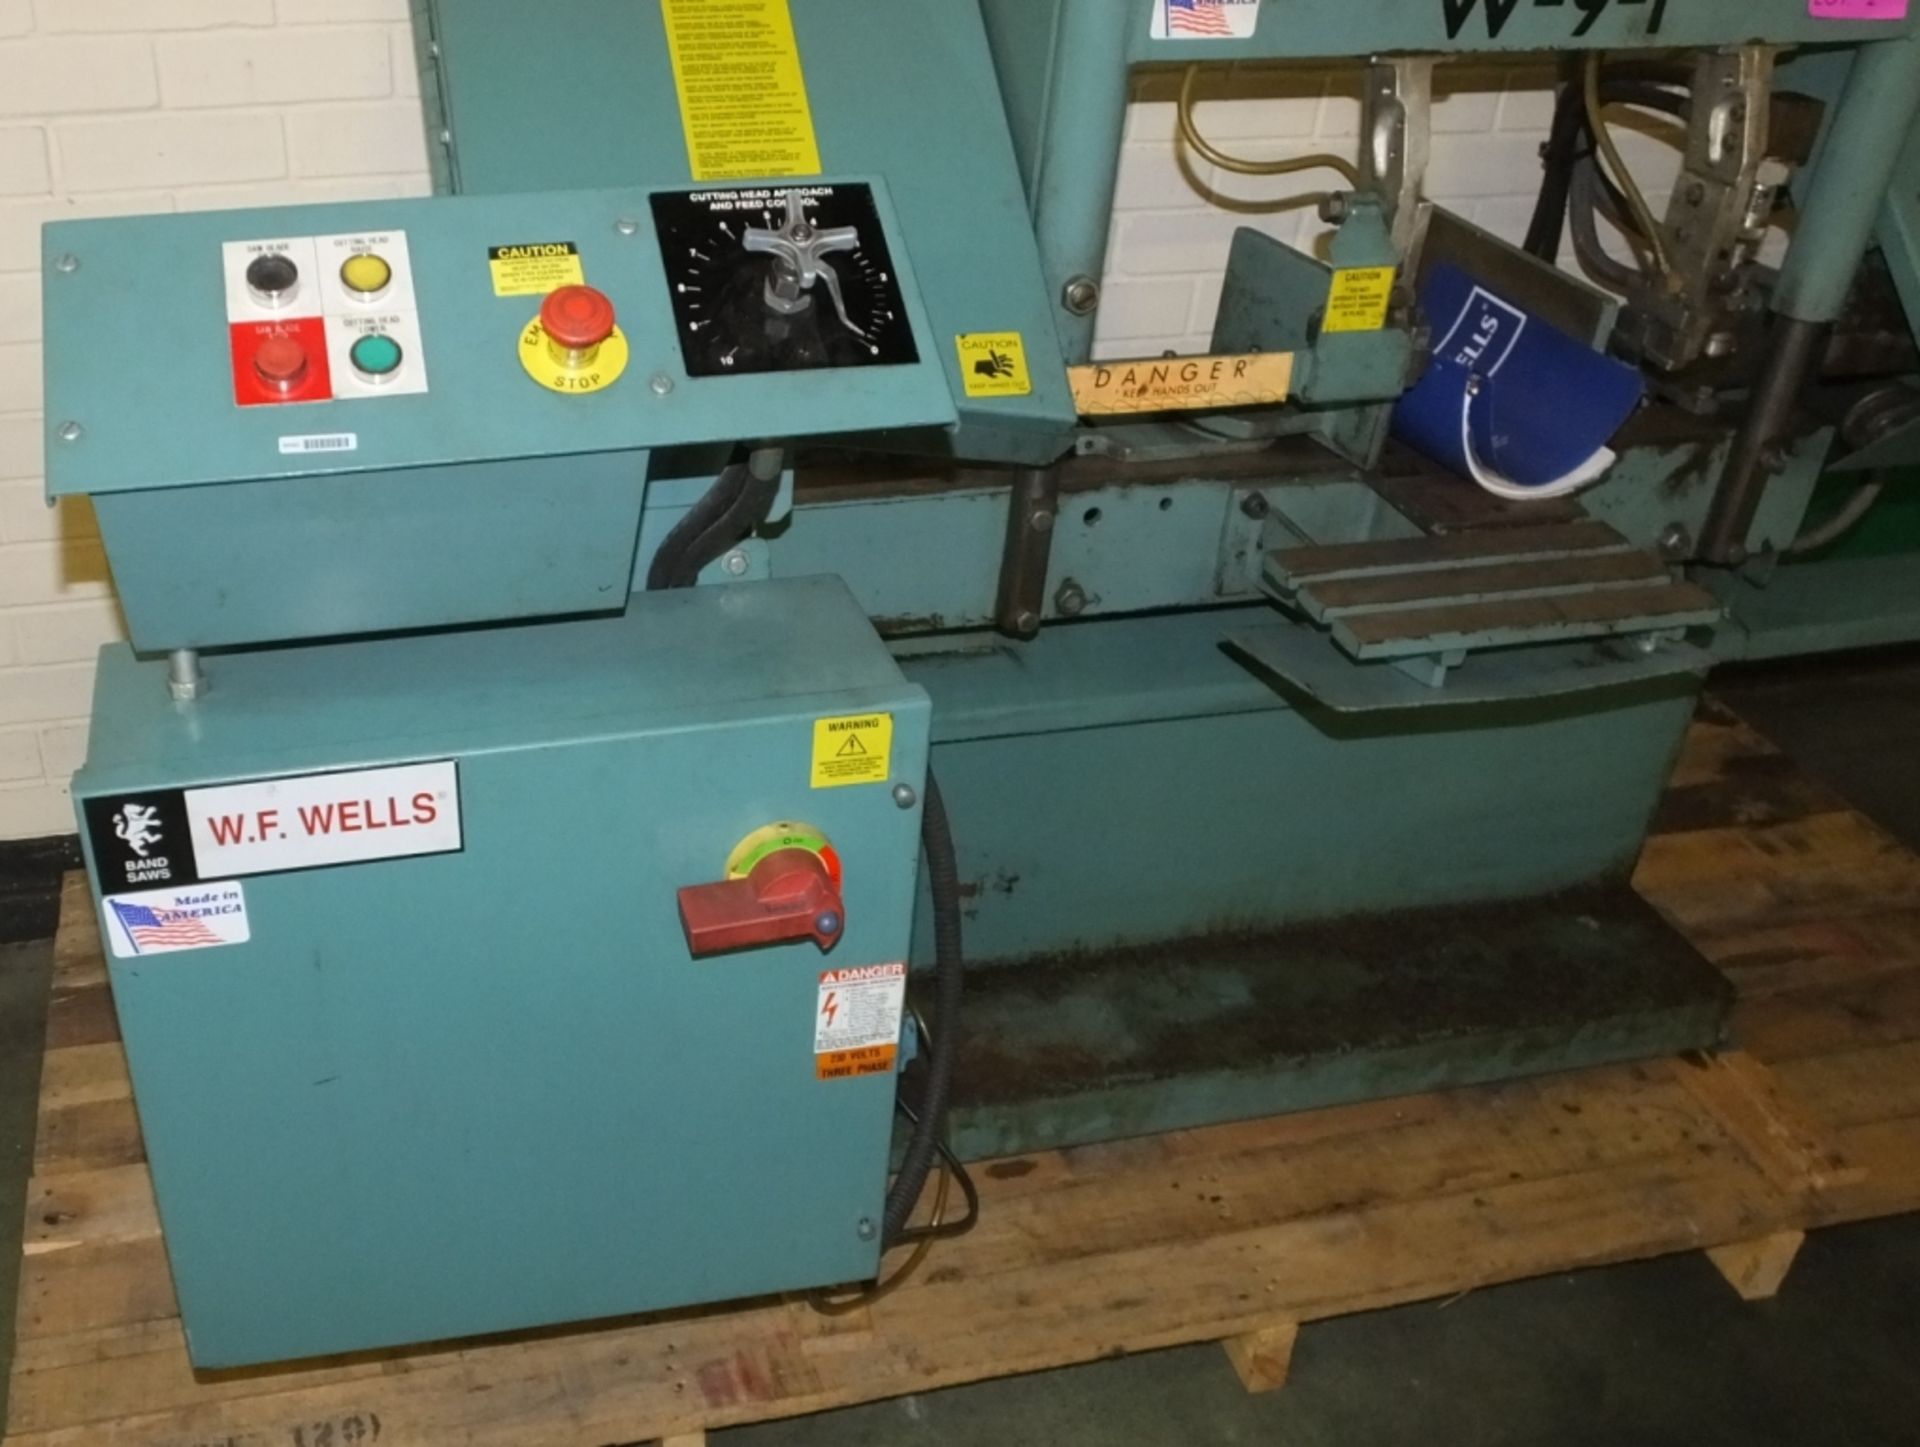 W.F.WELLS W-9-1 Powered Band Saw - £5+VAT lift out charge applied to this lot - Image 4 of 5